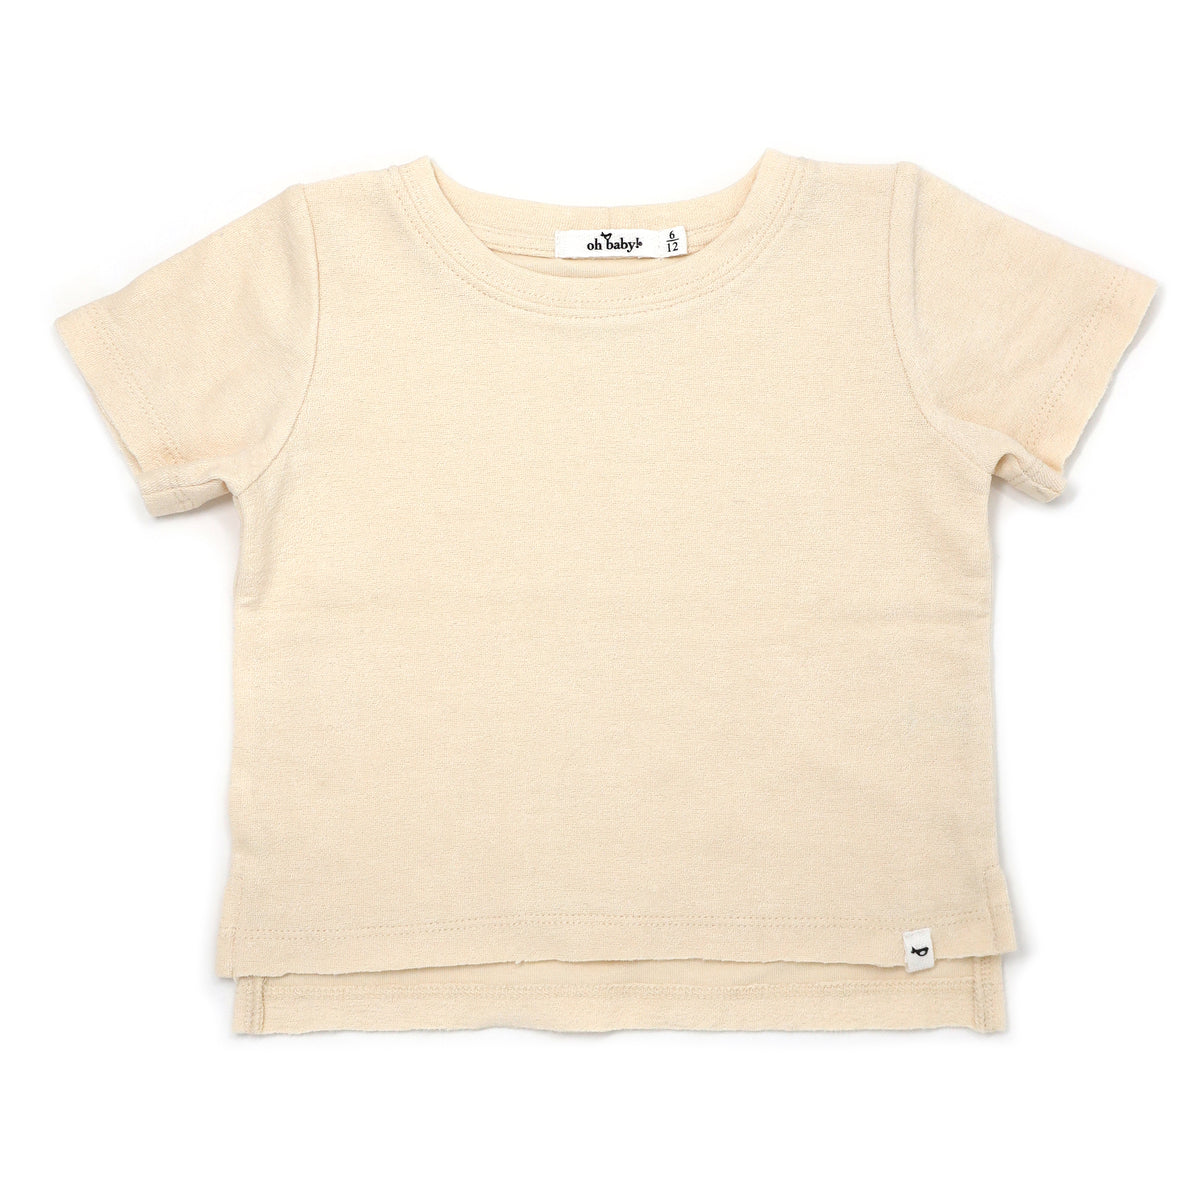 oh baby! Cotton Terry Raw Edge Tee - Natural